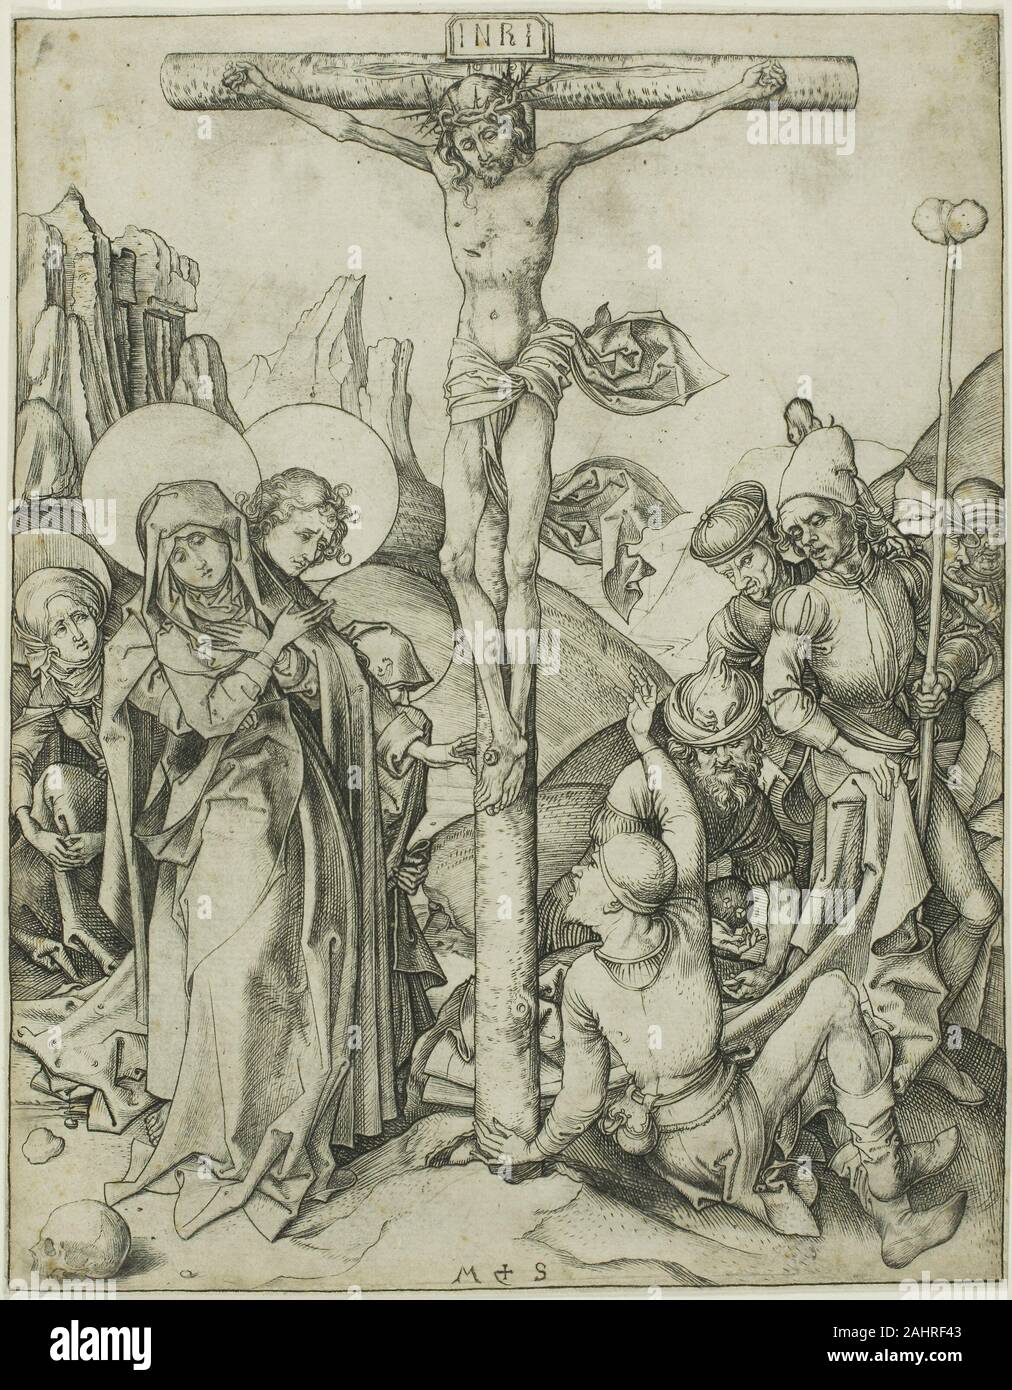 Martin Schongauer. The Crucifixion with the Holy Women, St. John and Roman Soldiers. 1450–1491. Germany. Engraving on paper Stock Photo